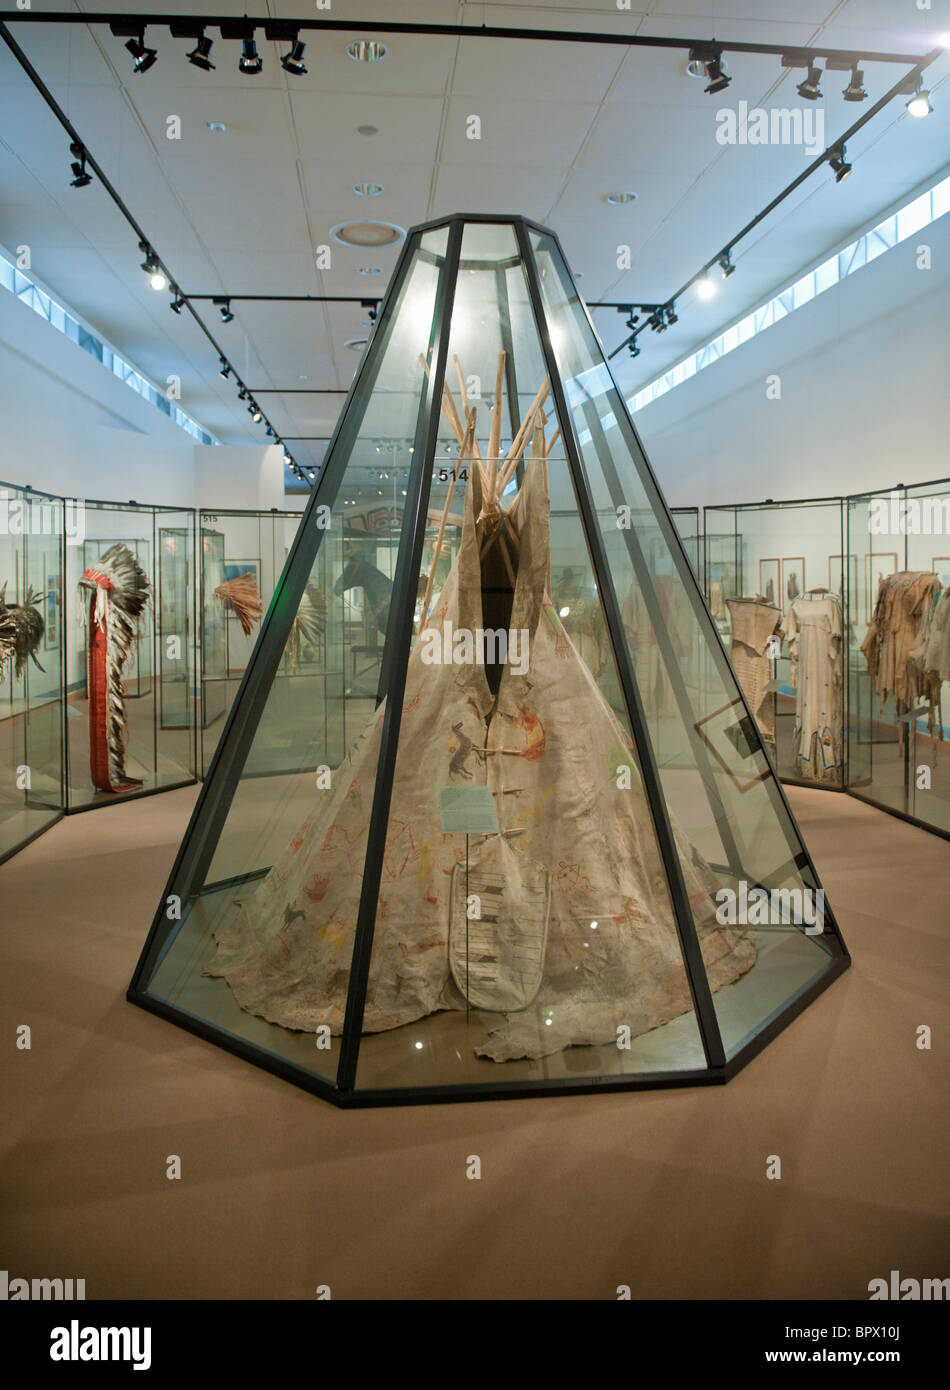 North American Native tent on display at Ethnological Museum in Dahlem in Berlin Germany Stock Photo